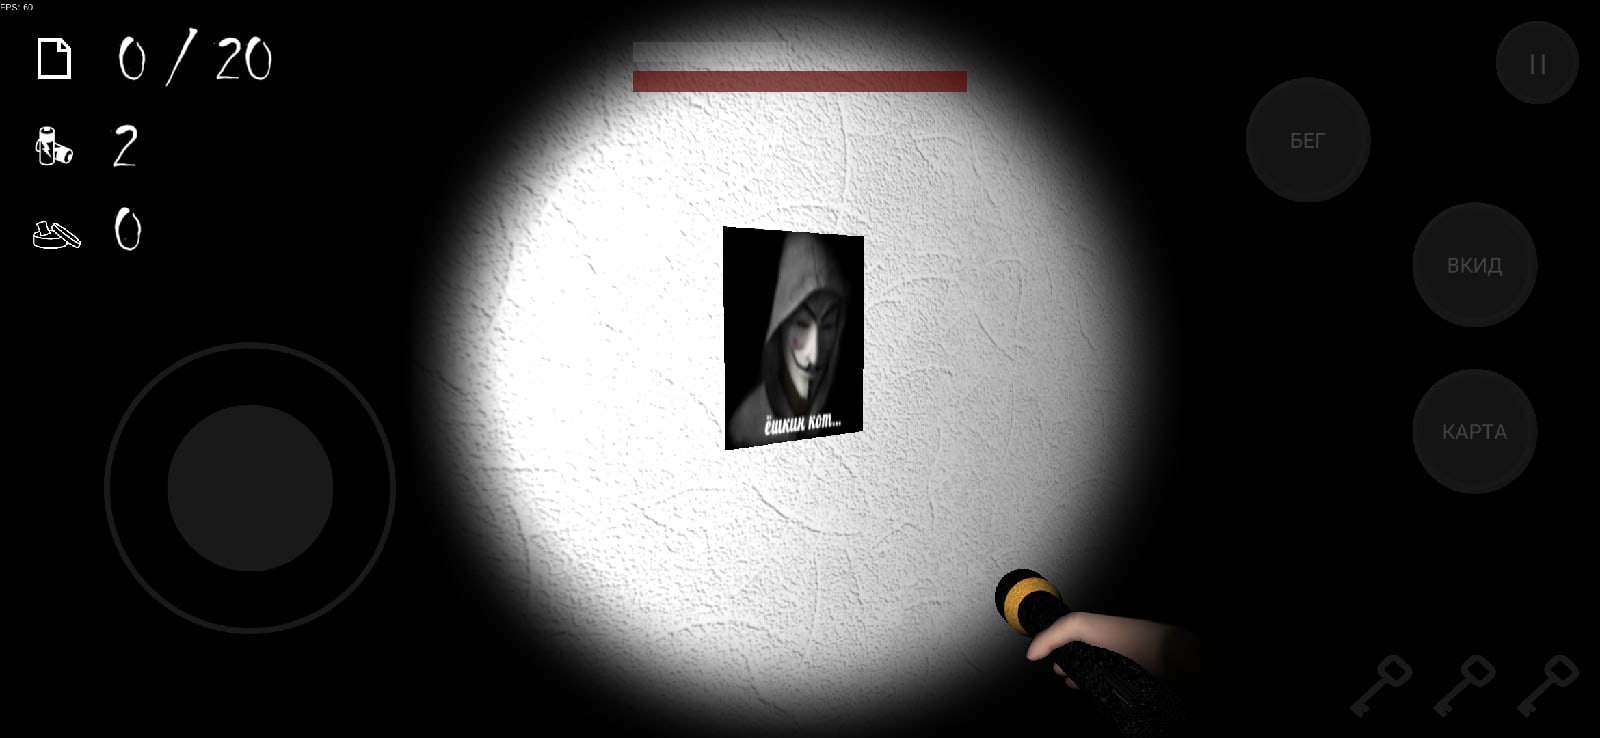 ANONYMOUS HORROR - Android game screenshots.